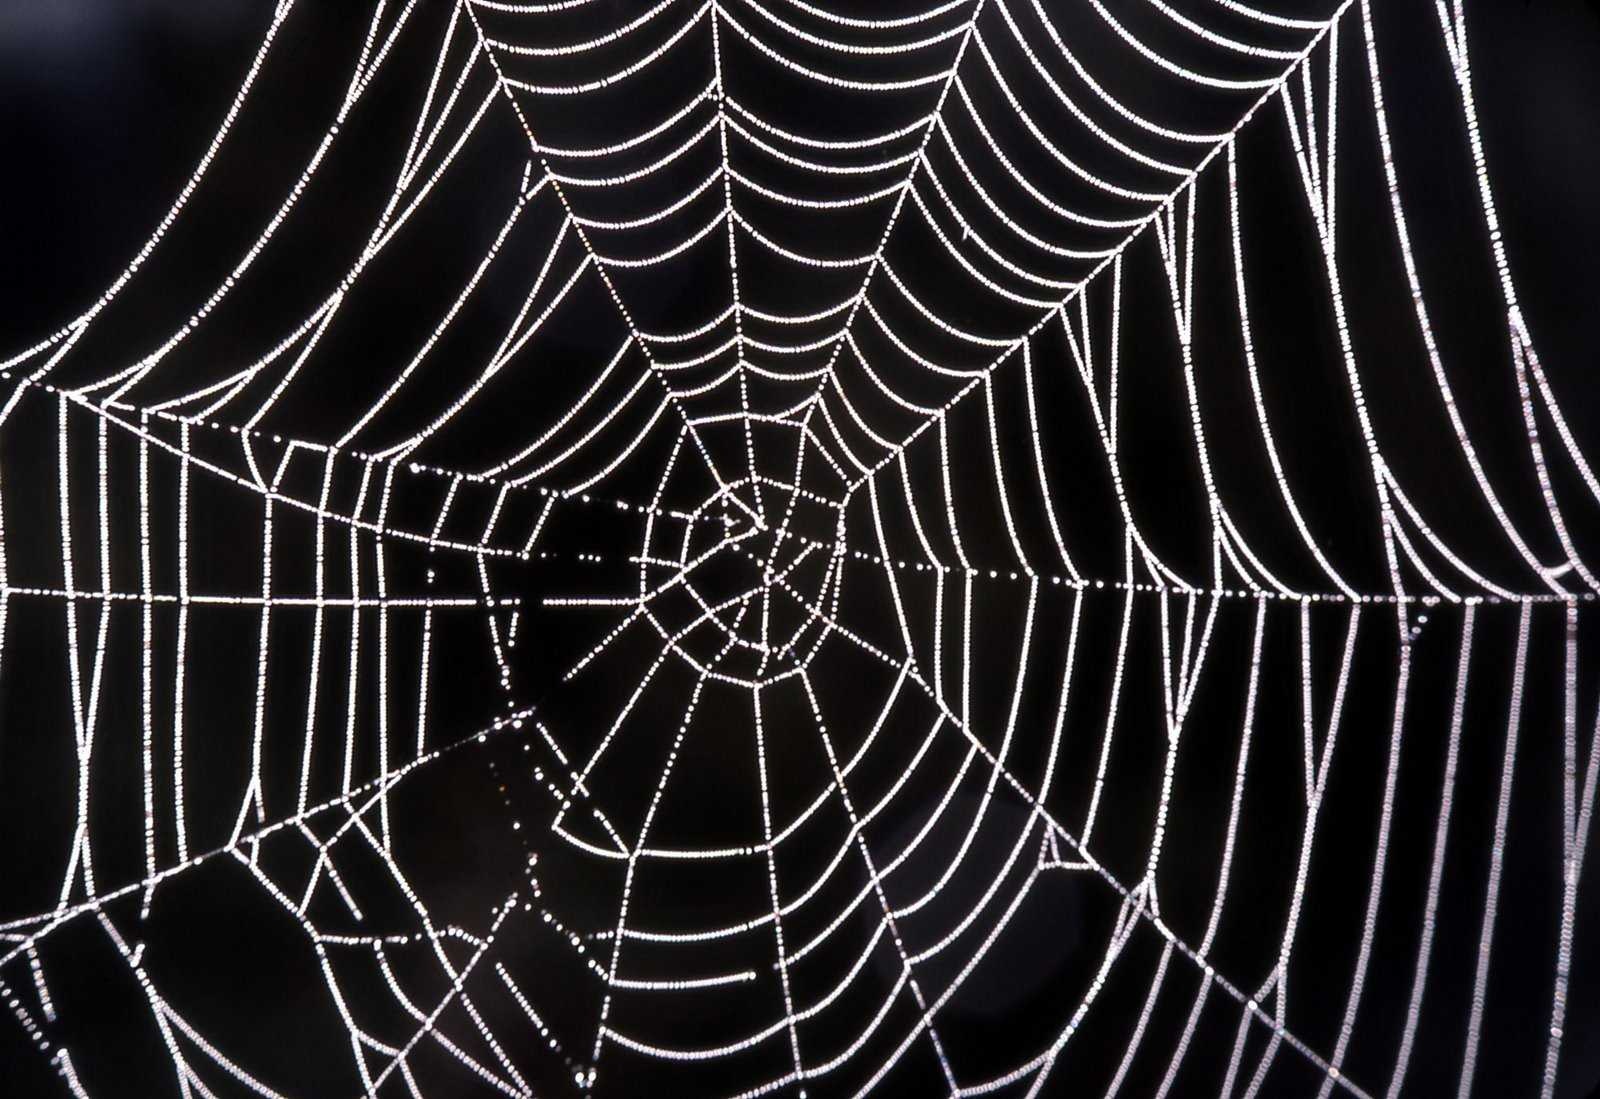 Spider web image classifcation dataset for machine learning